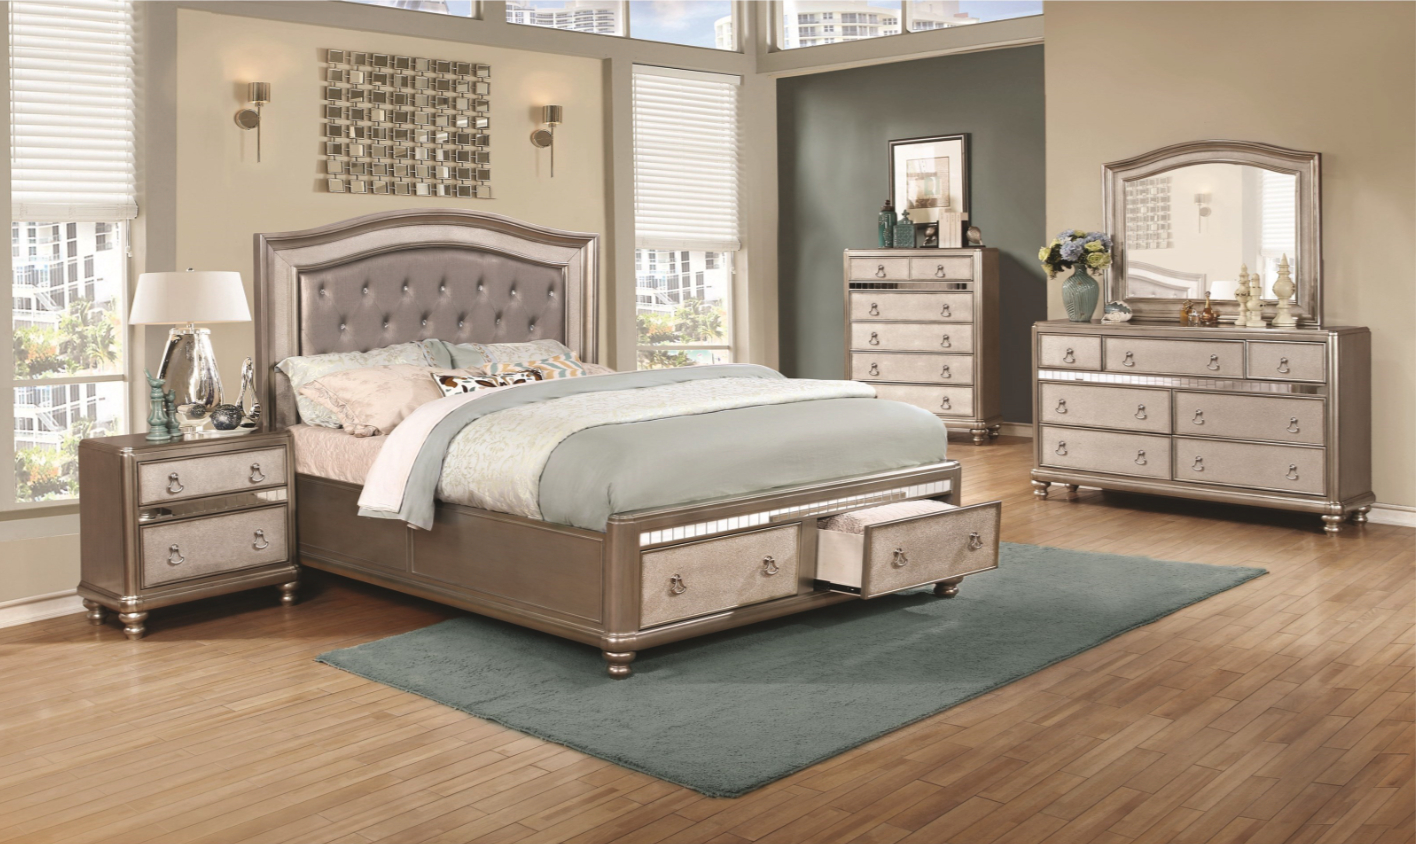 Bling Game 4pc Storage Bedroom Set intended for proportions 1416 X 844